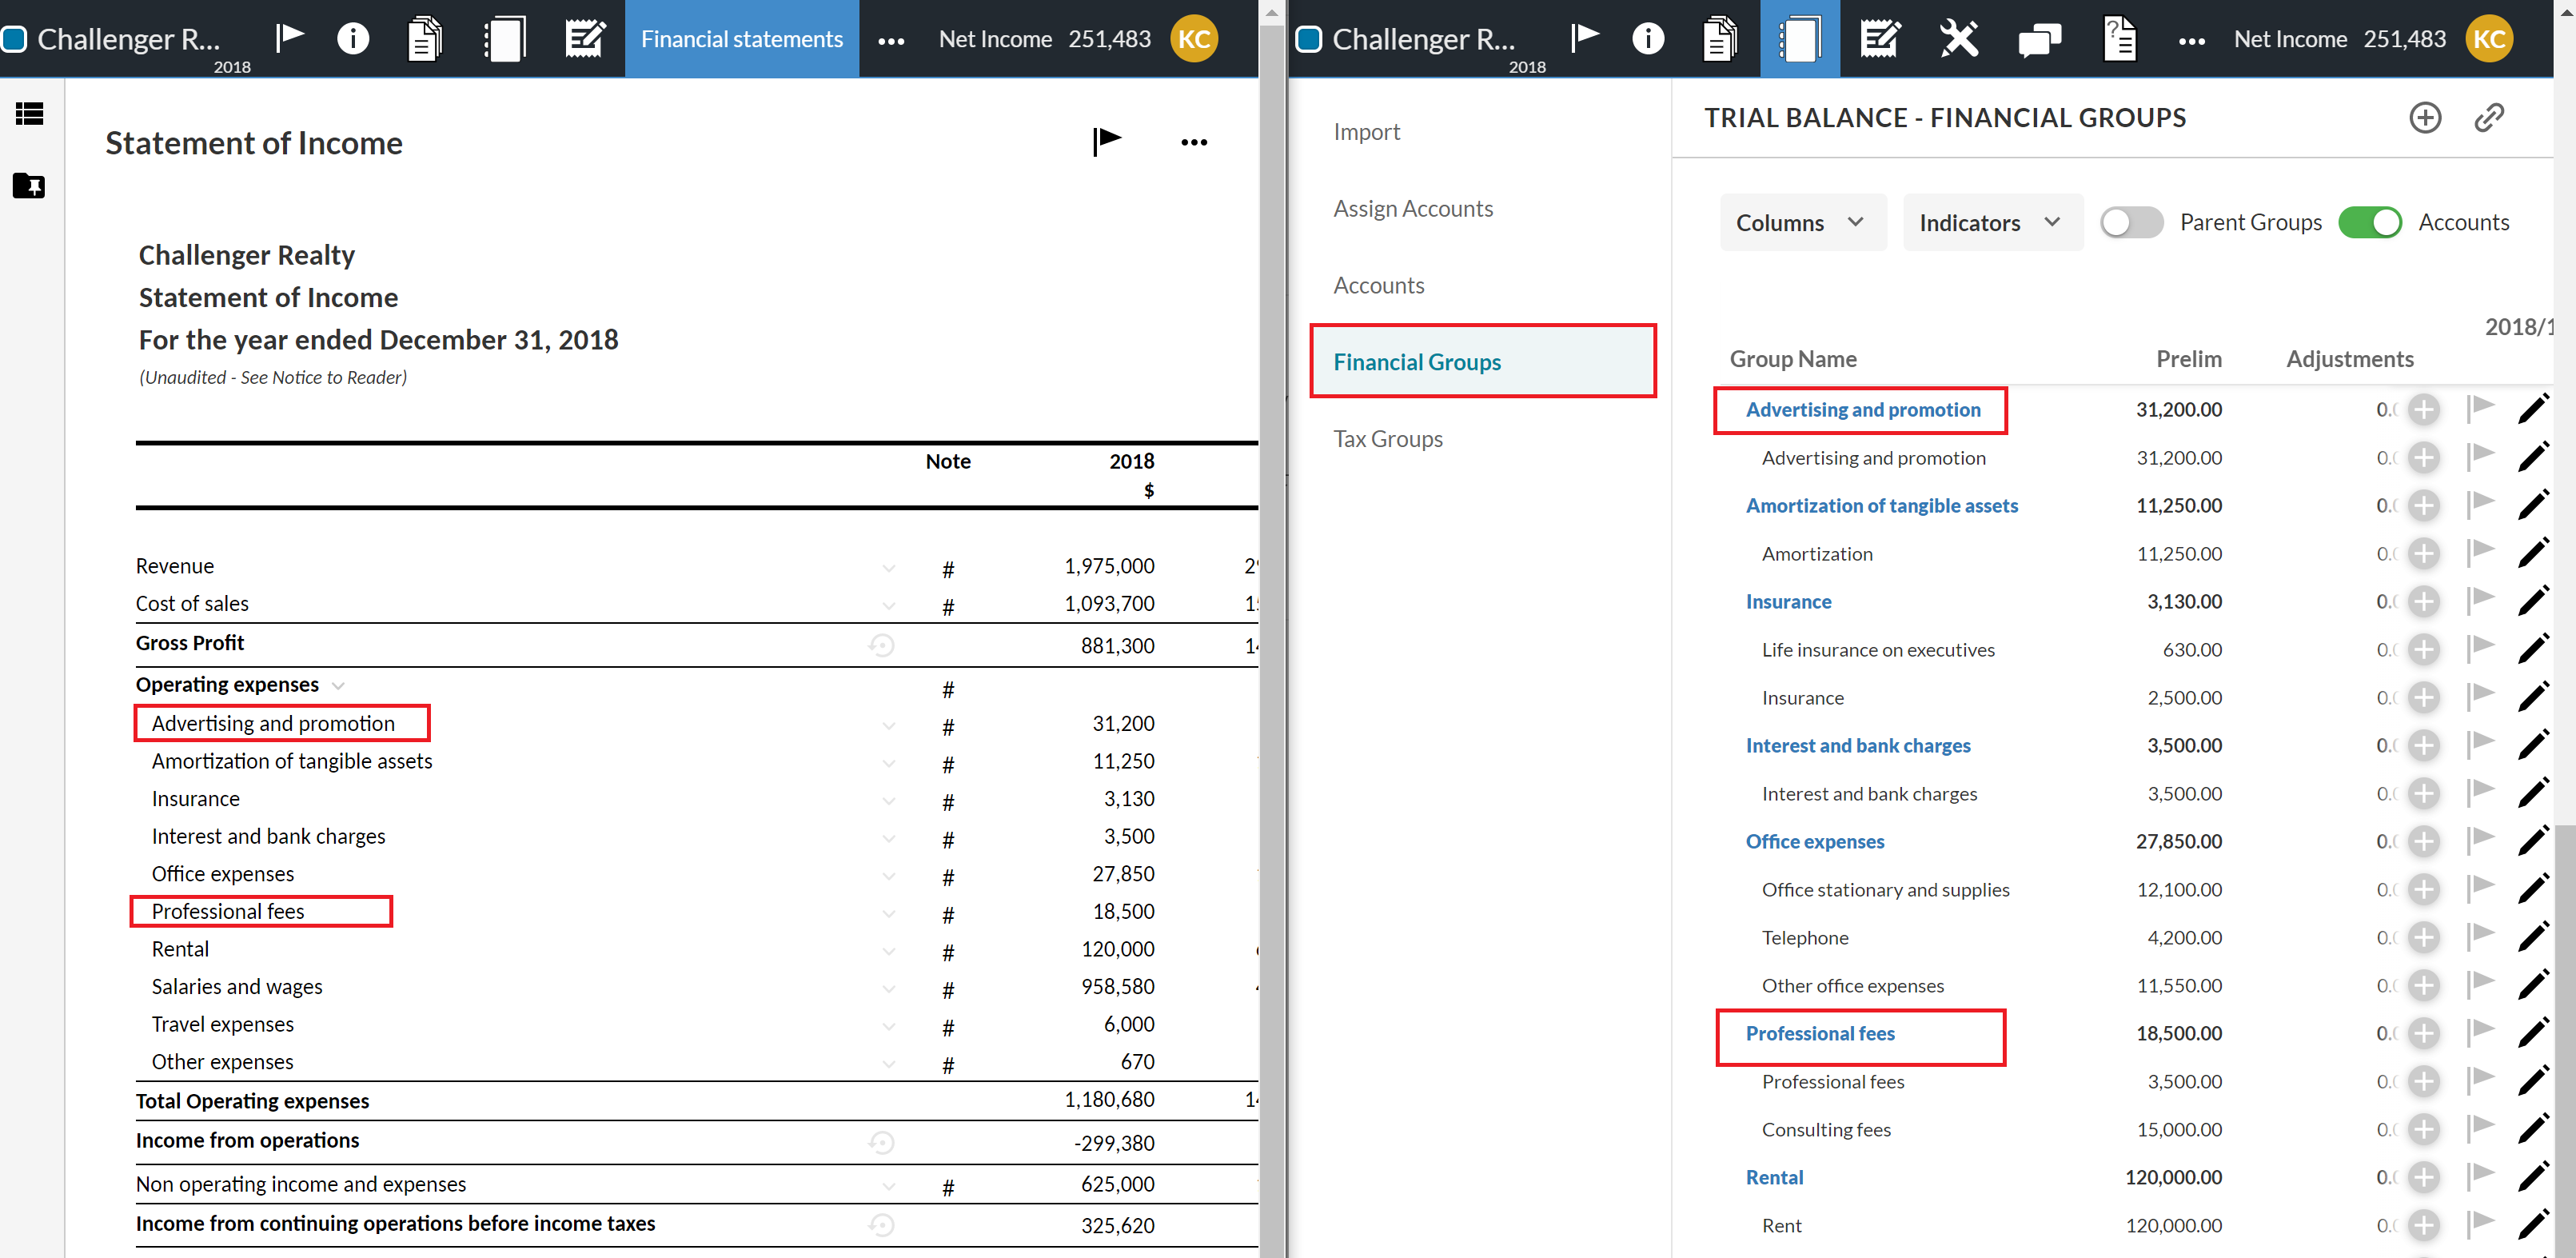 On the left: Financial groupings presentation in the Statement of Income. On the right: Financial groupings presentation in the Data page. 